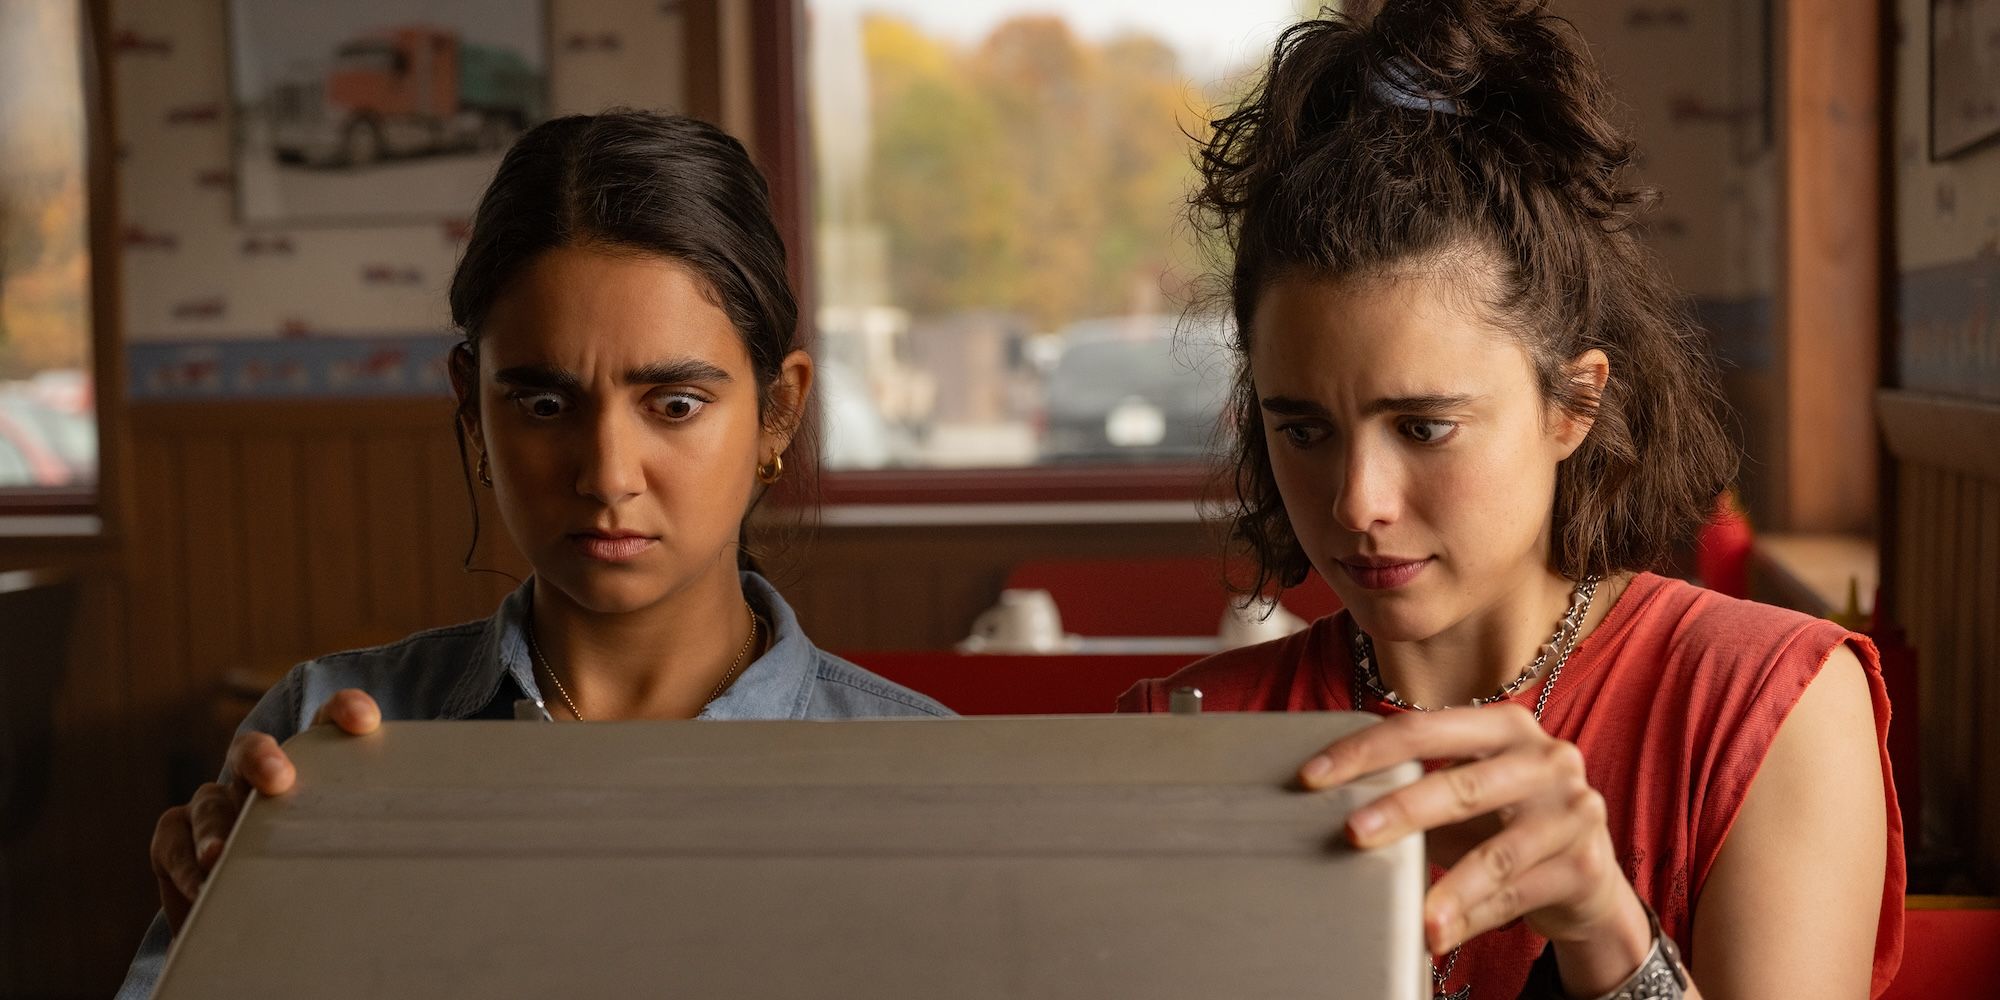 Geraldine Viswanathan and Margaret Qualley as Marian and Jamie looking shocked opening a briefcase in Drive-Away Dolls